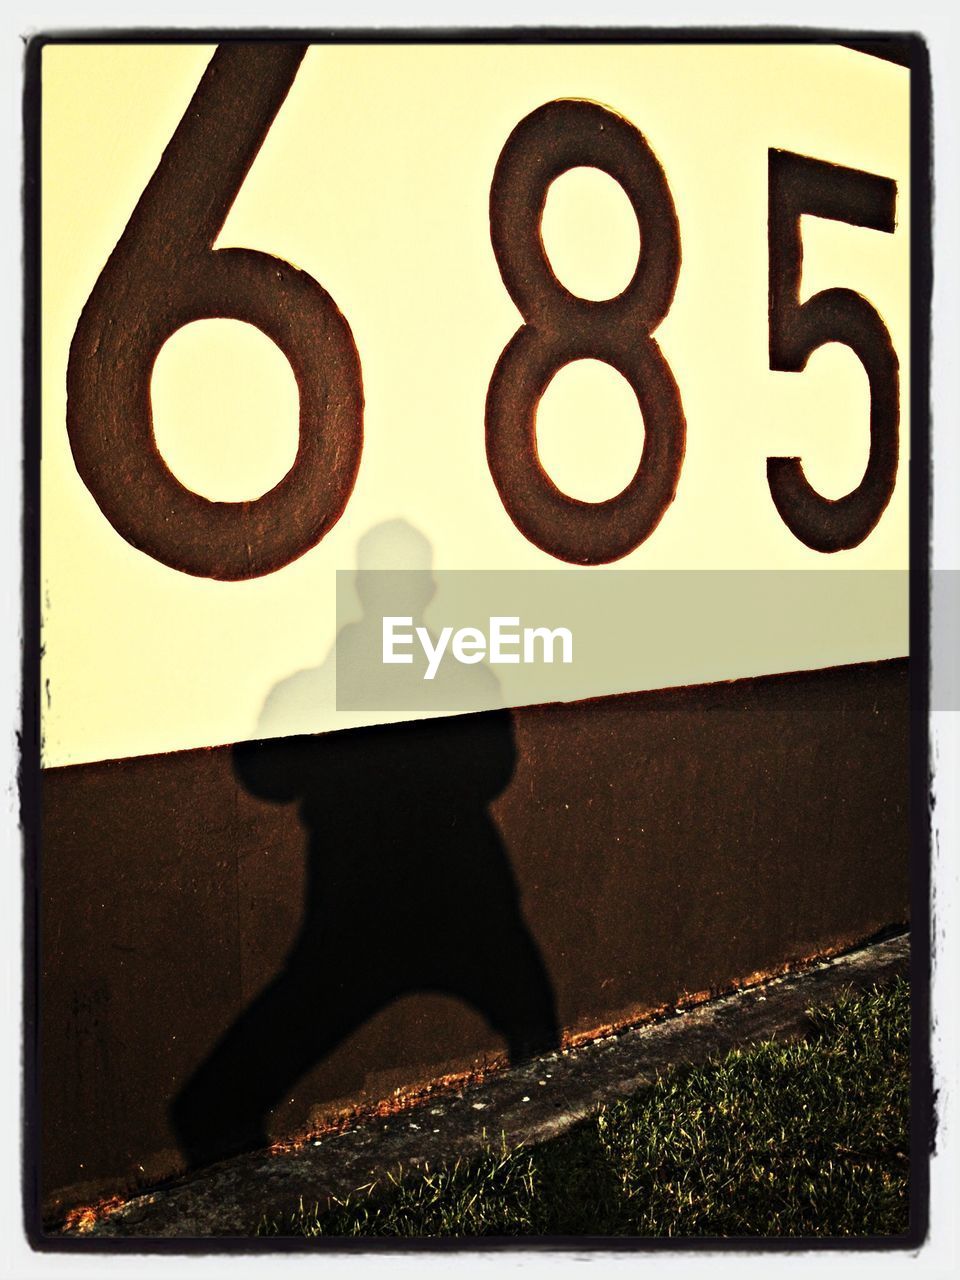 Silhouette of person against wall with number 685